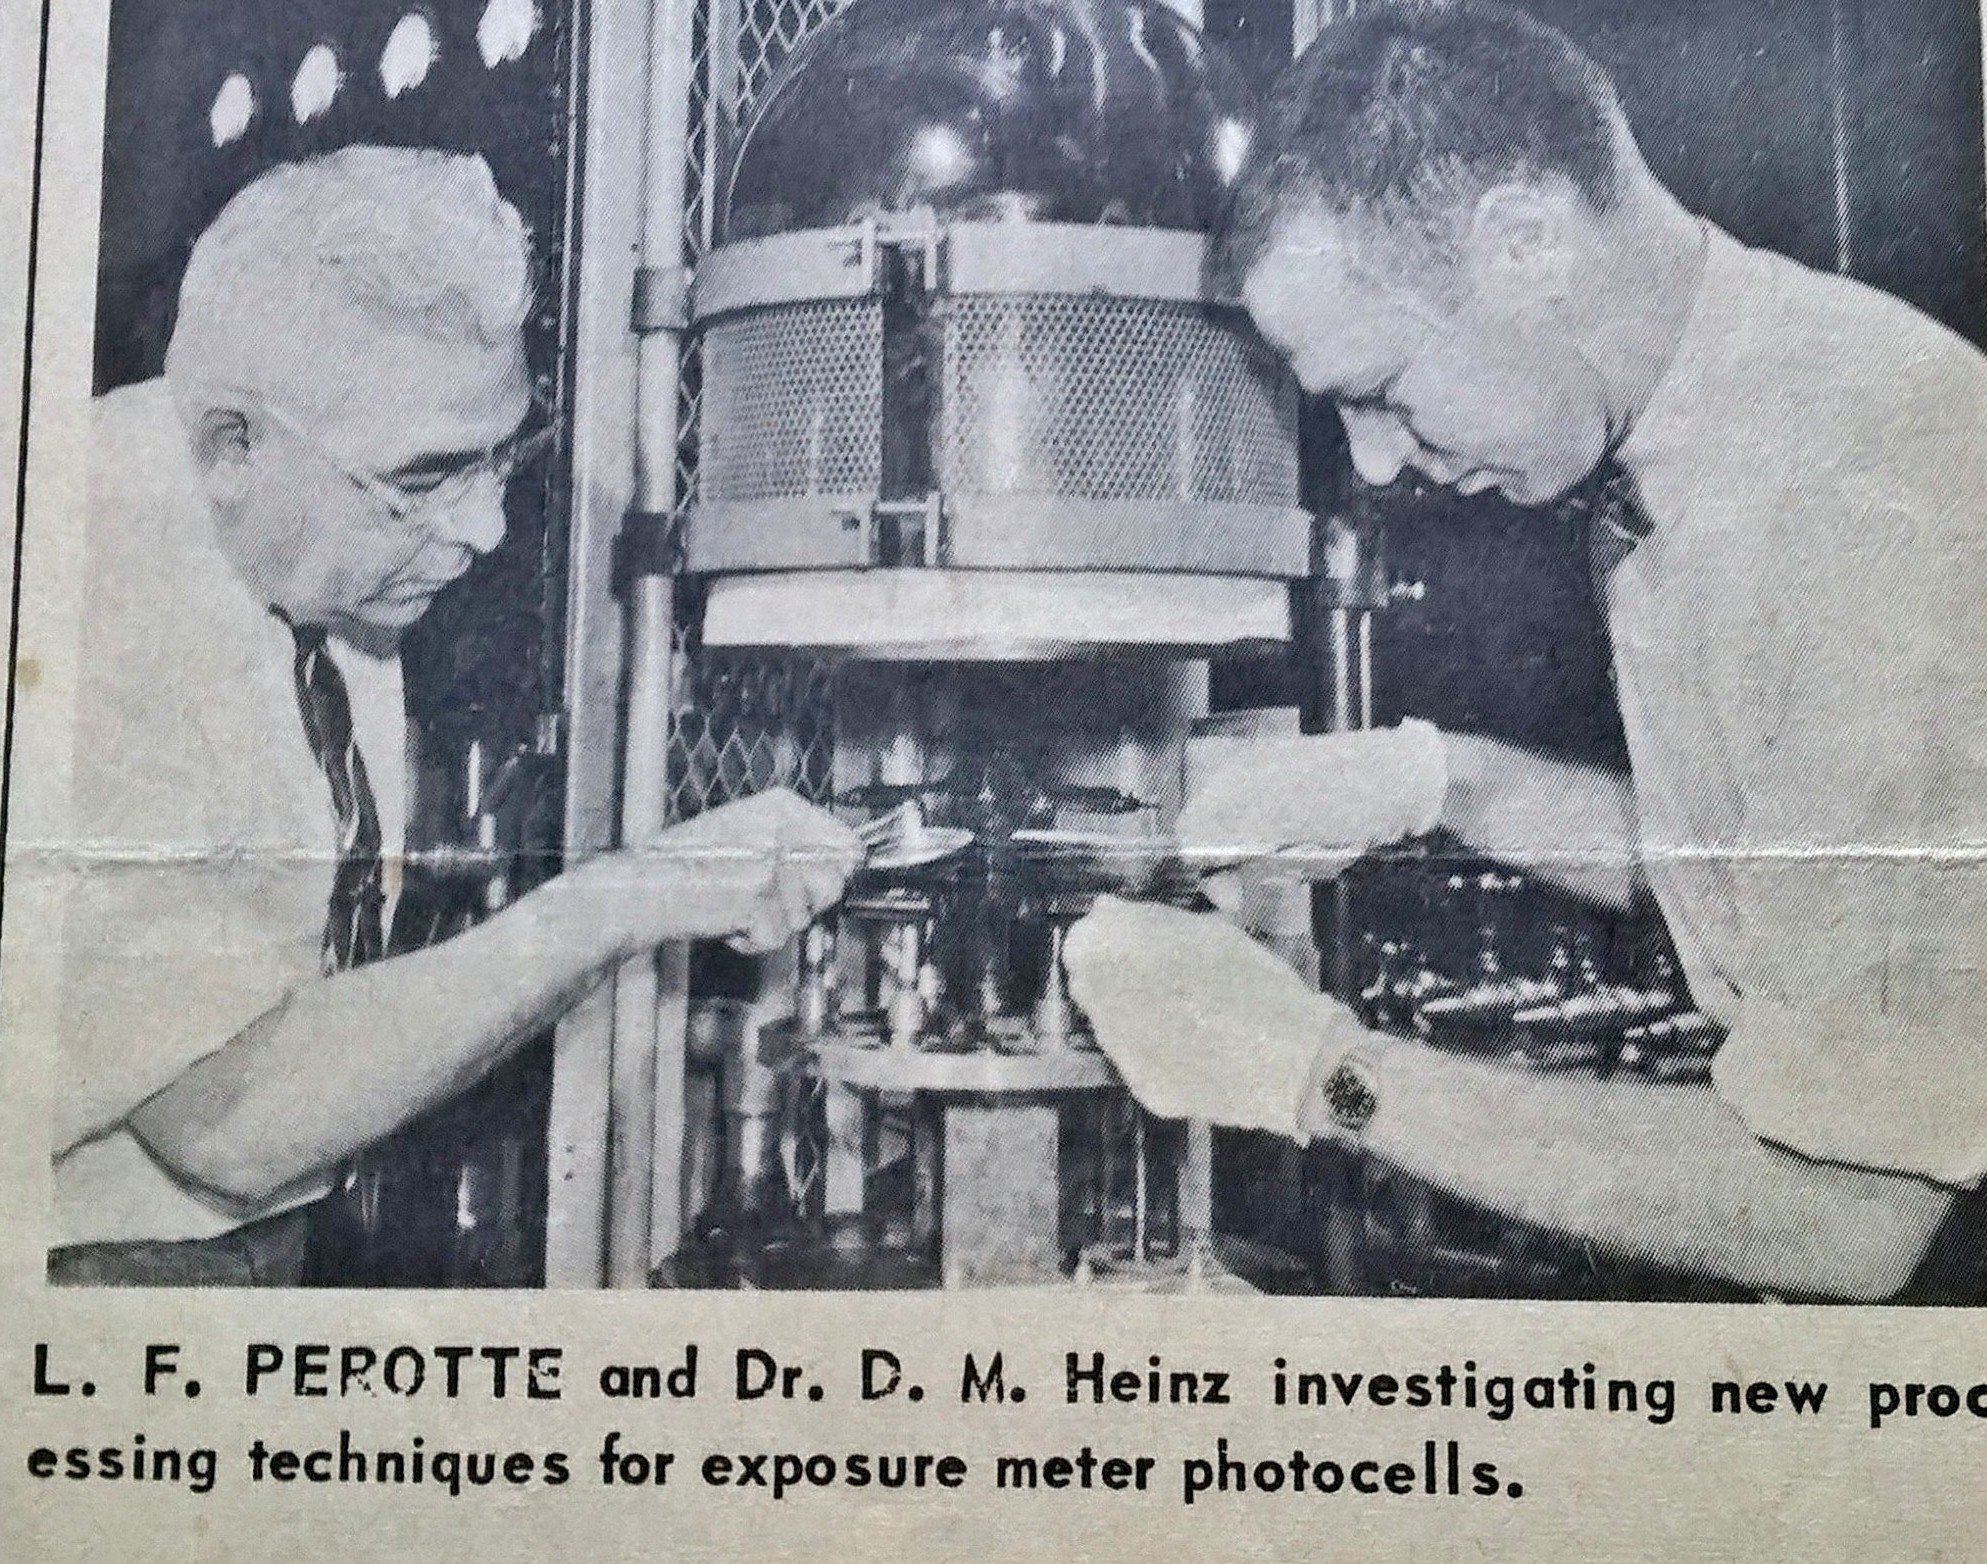 L.F. Perotte and Dr. David M. Heinz